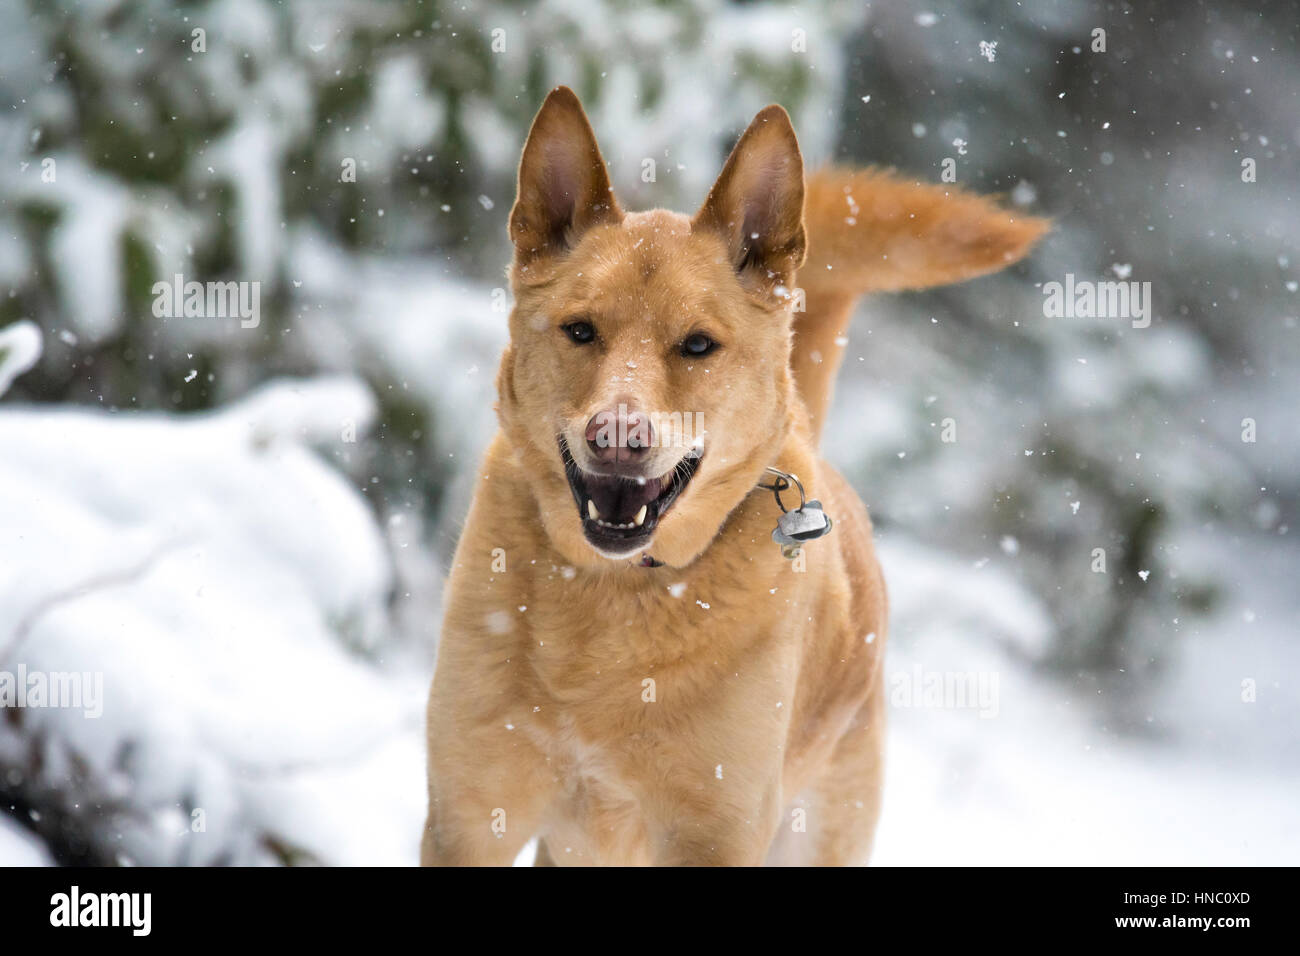 Ginger colored dog with collar happy sprinting Stock Photo